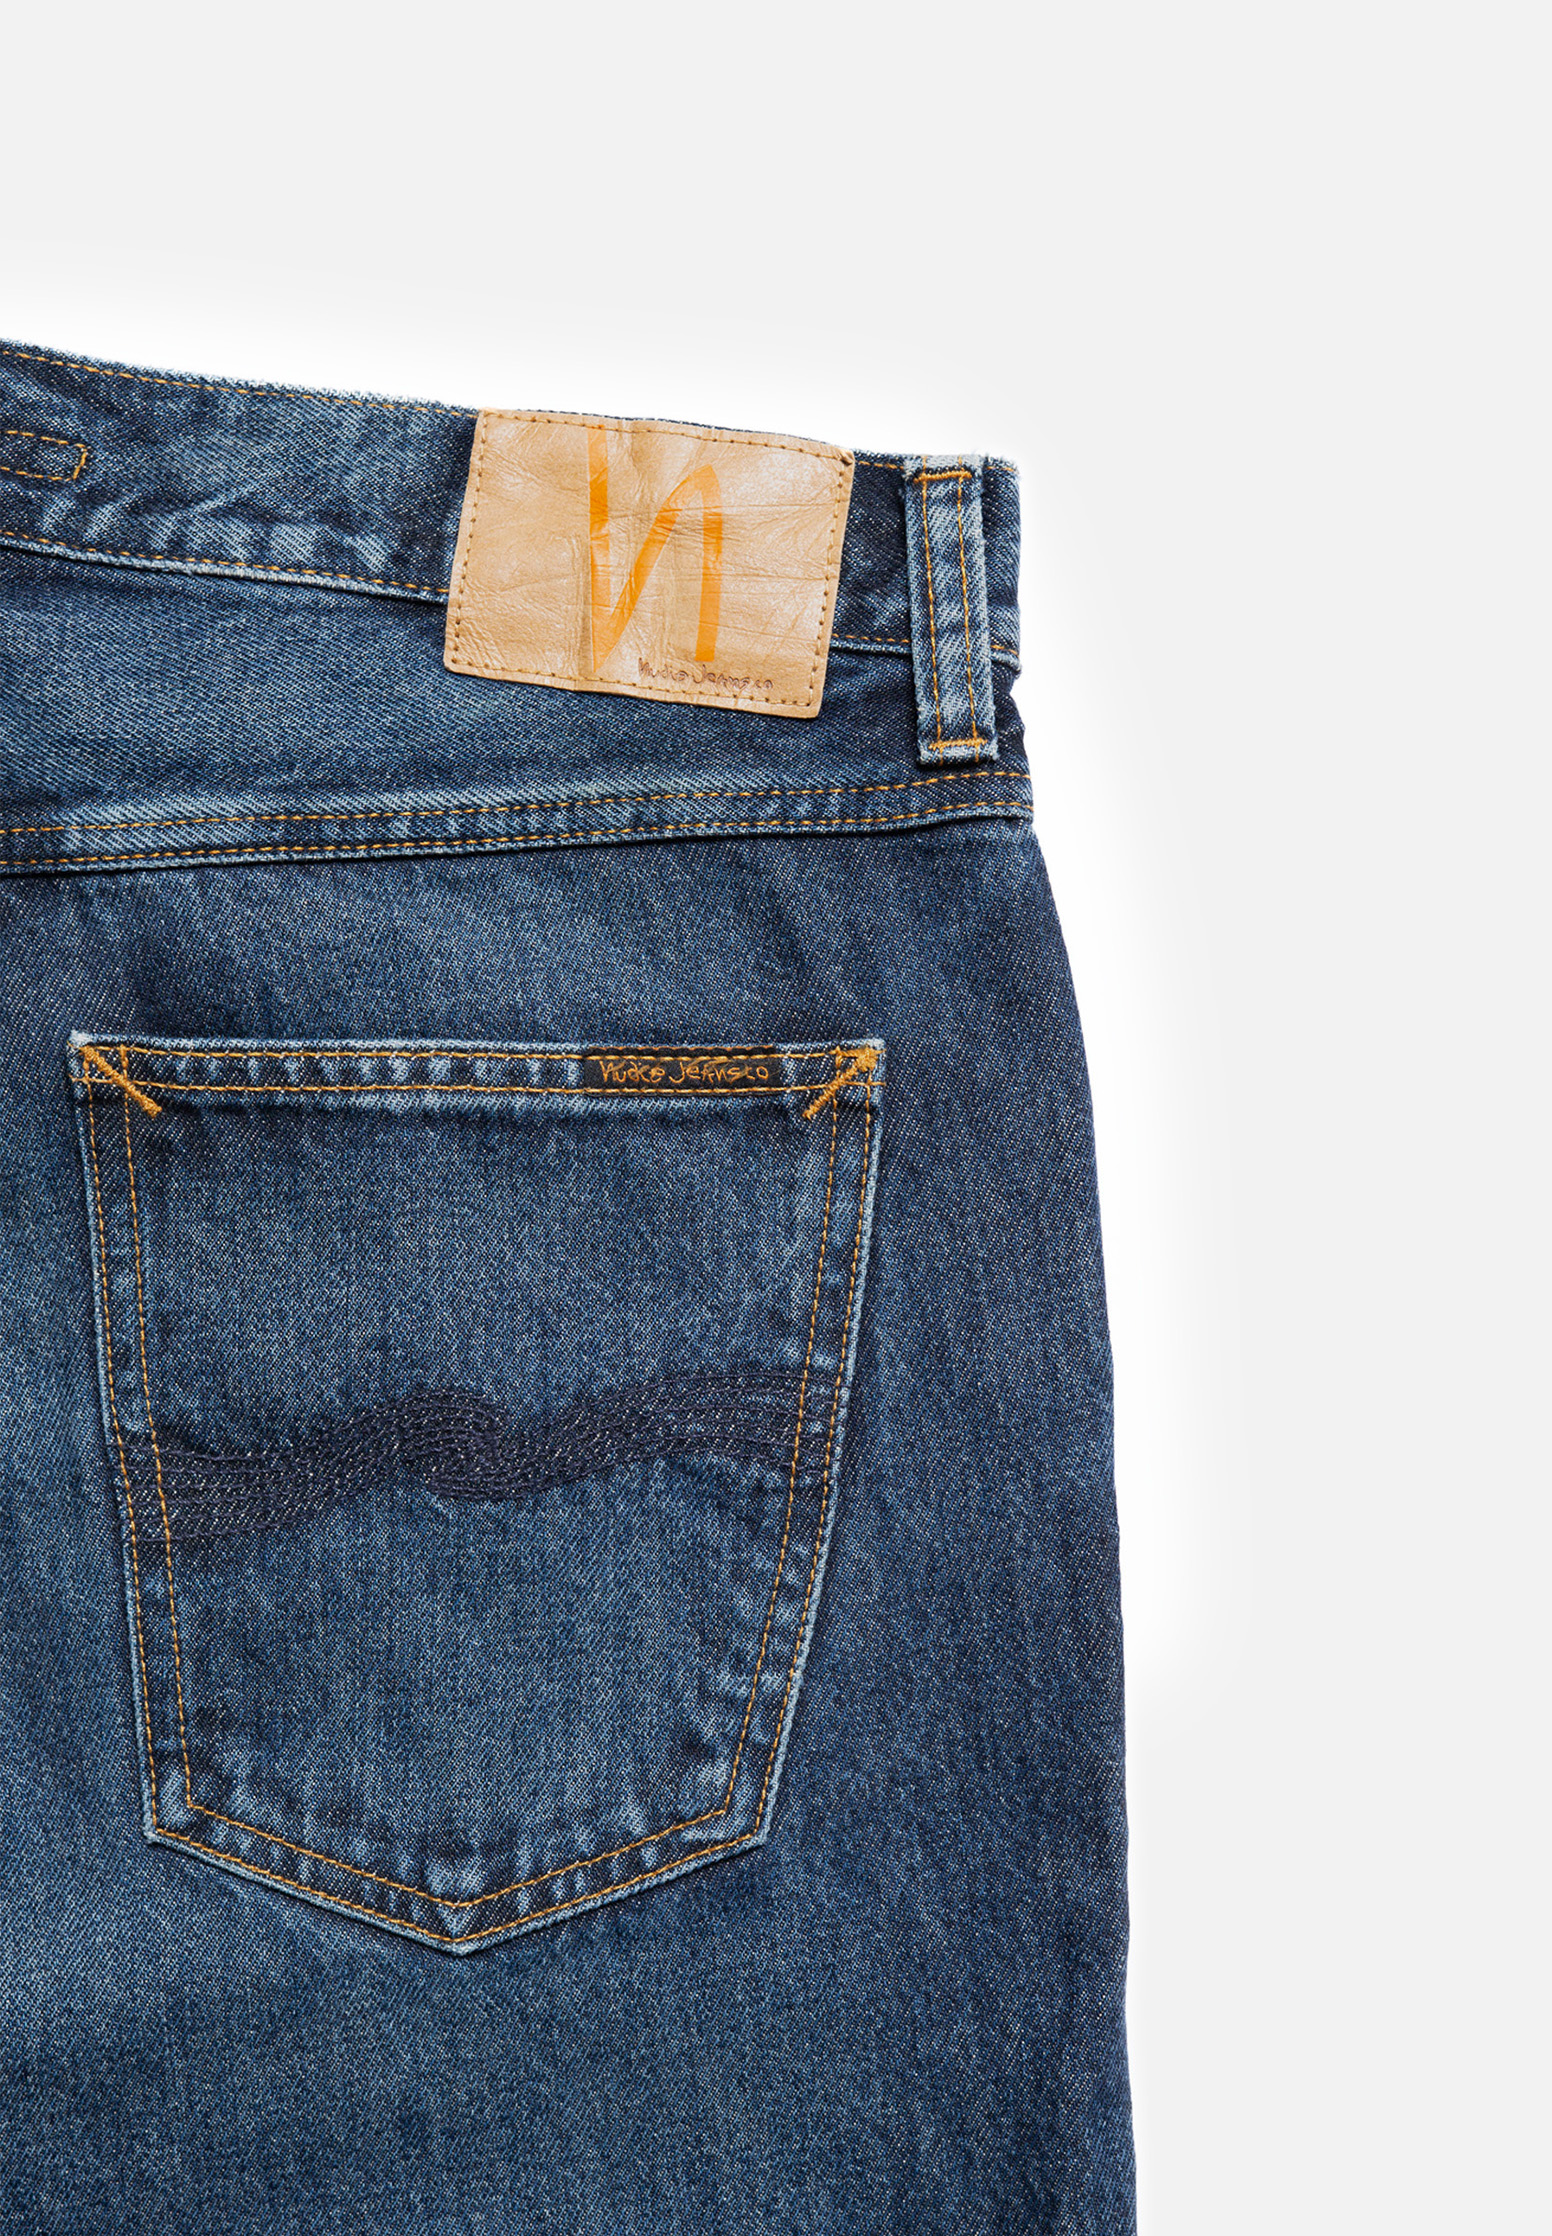 NUDIE JEANS Jeans Gritty Jackson blue soil 30/30